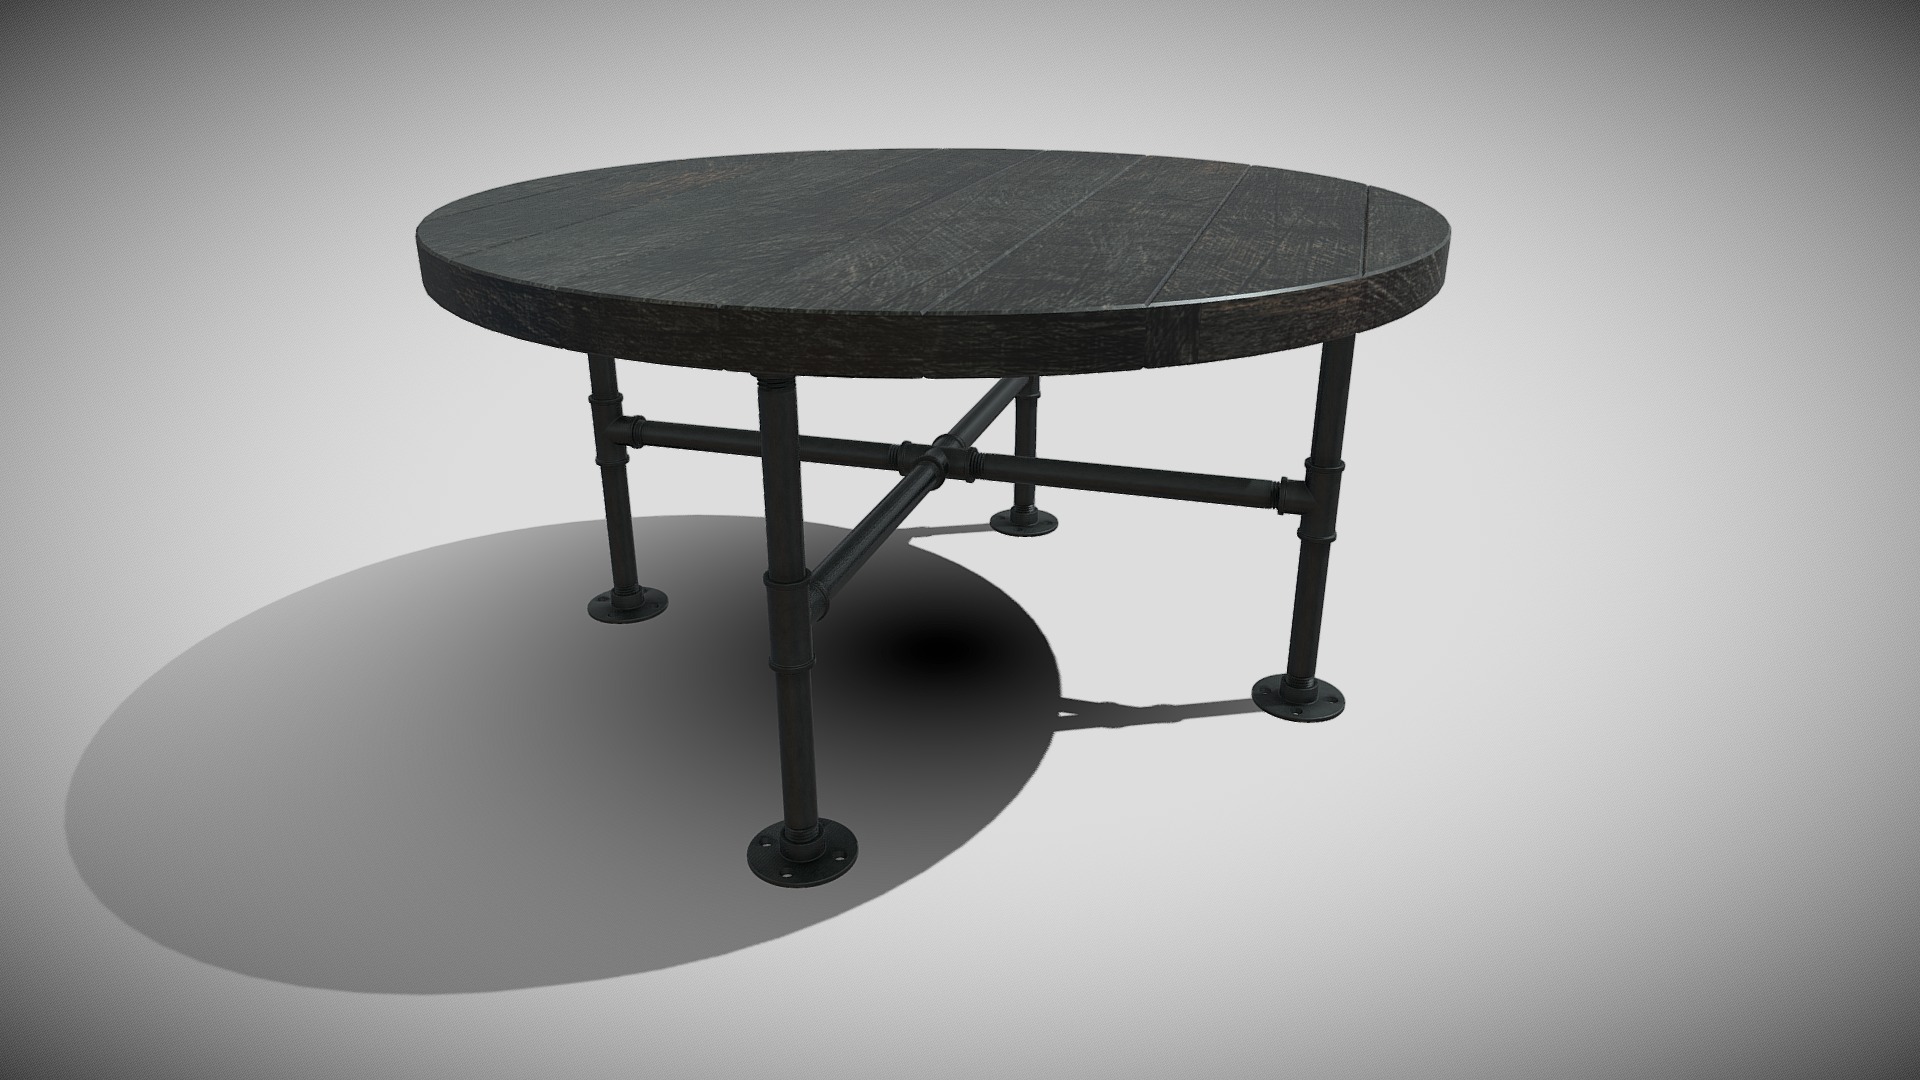 3D model Industrial Pipe Coffeetable - This is a 3D model of the Industrial Pipe Coffeetable. The 3D model is about a table with a metal top.